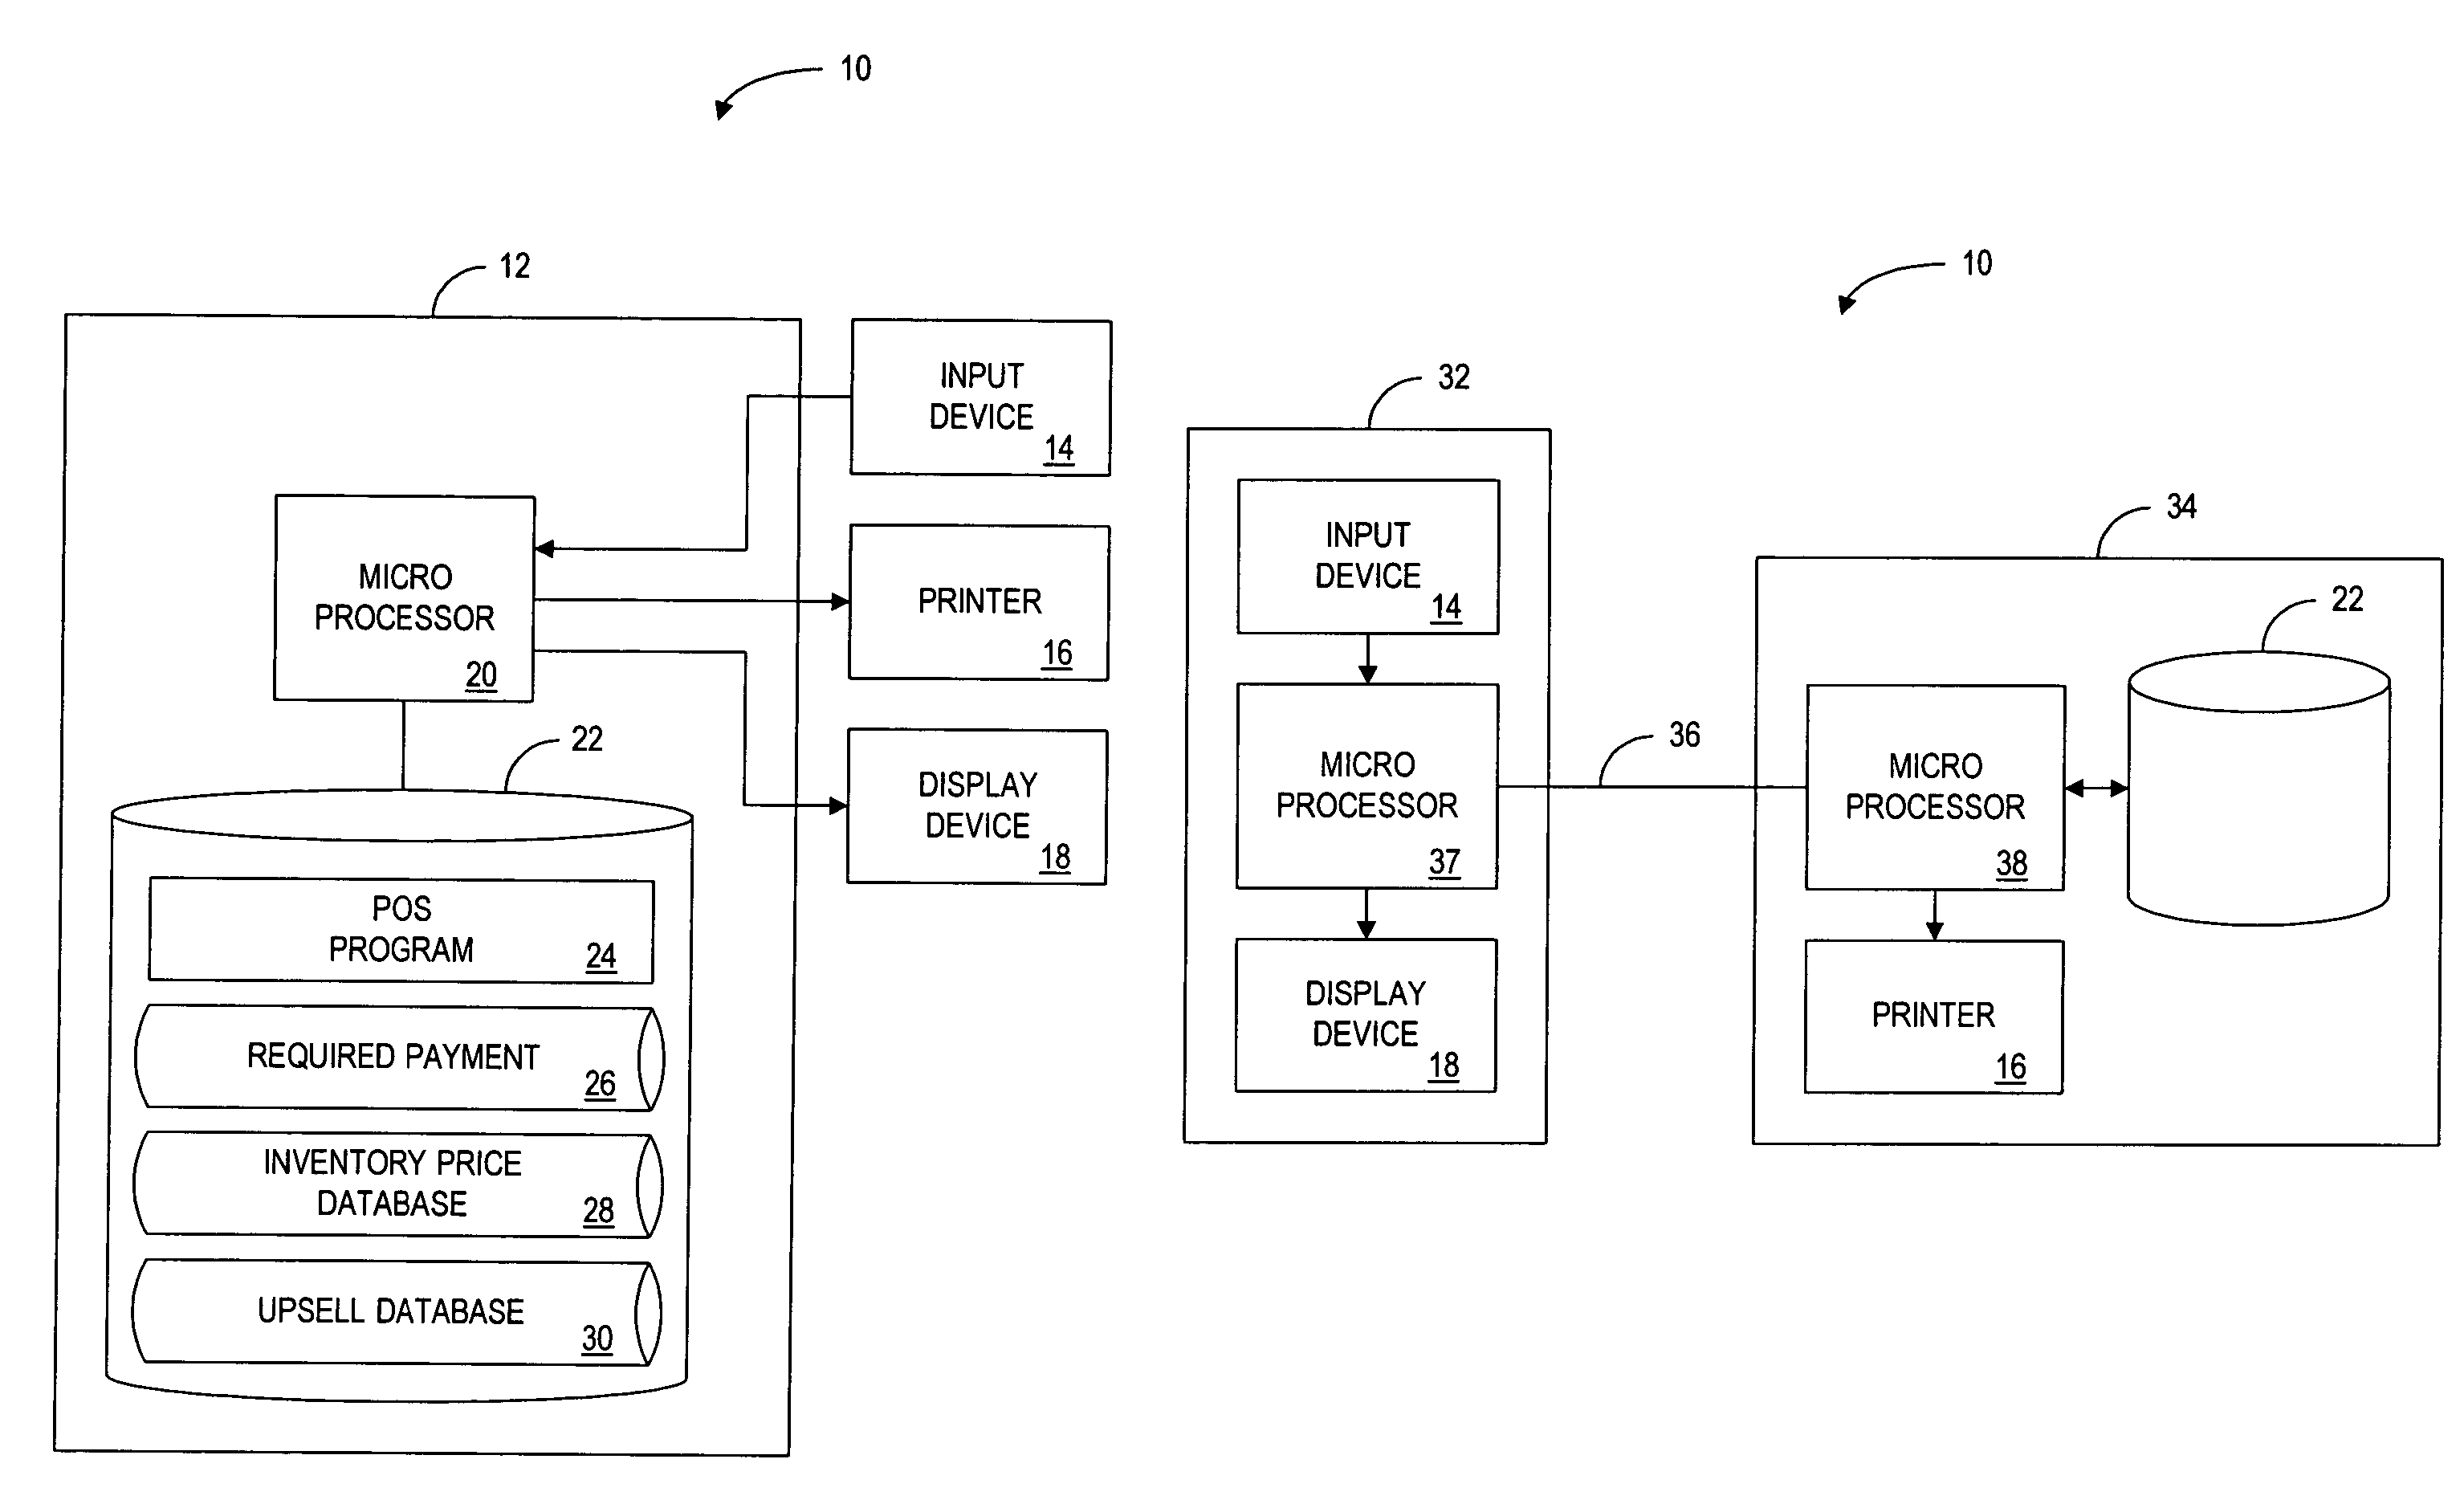 Method and system for processing supplementary product sales at a point-of-sale terminal